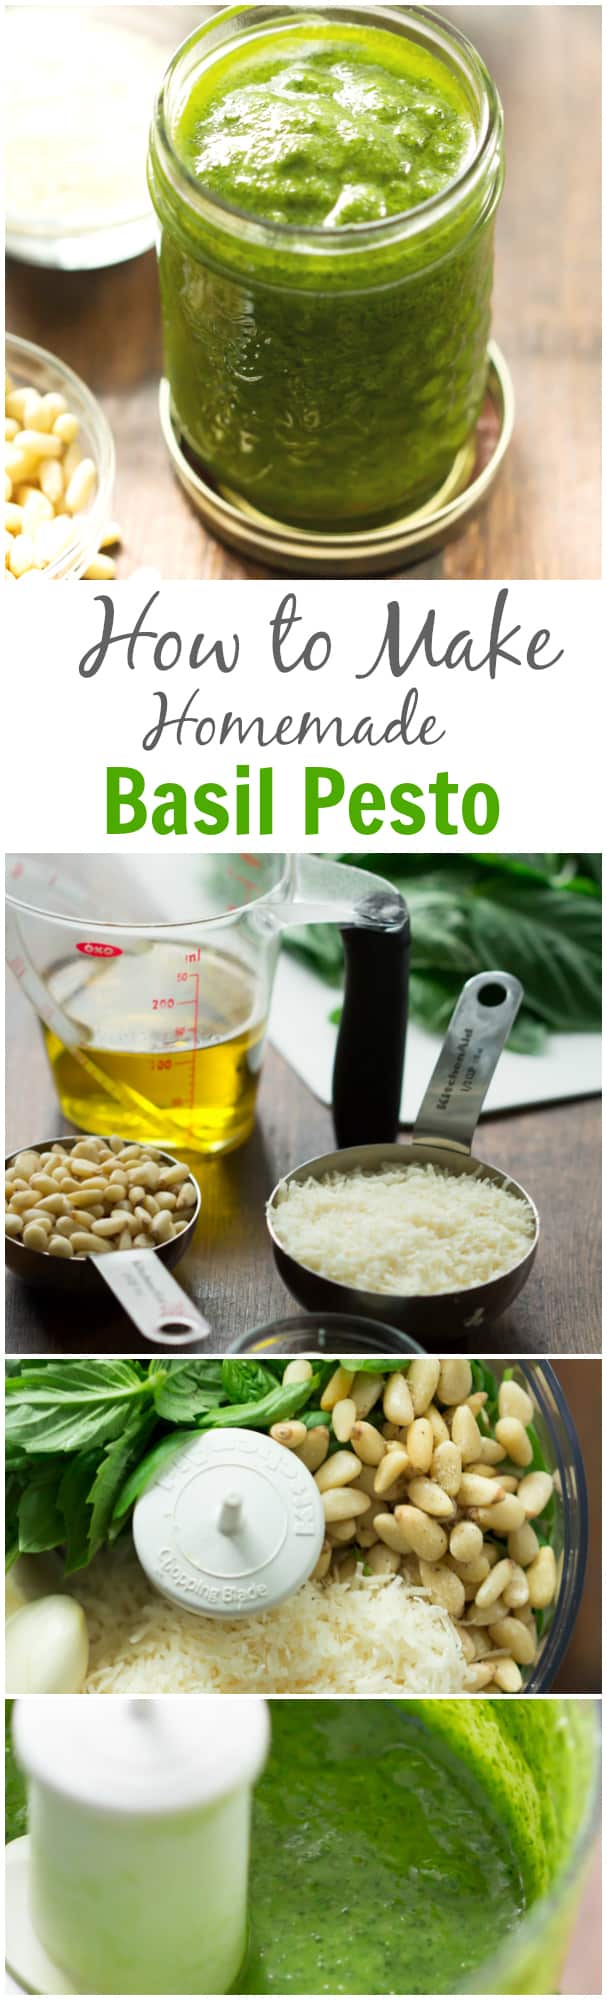 How to make Homemade Basil Pesto - Homemade classic basil pesto recipe with just 5 ingredients. This is a perfect recipe to replace your store-bought pesto. 